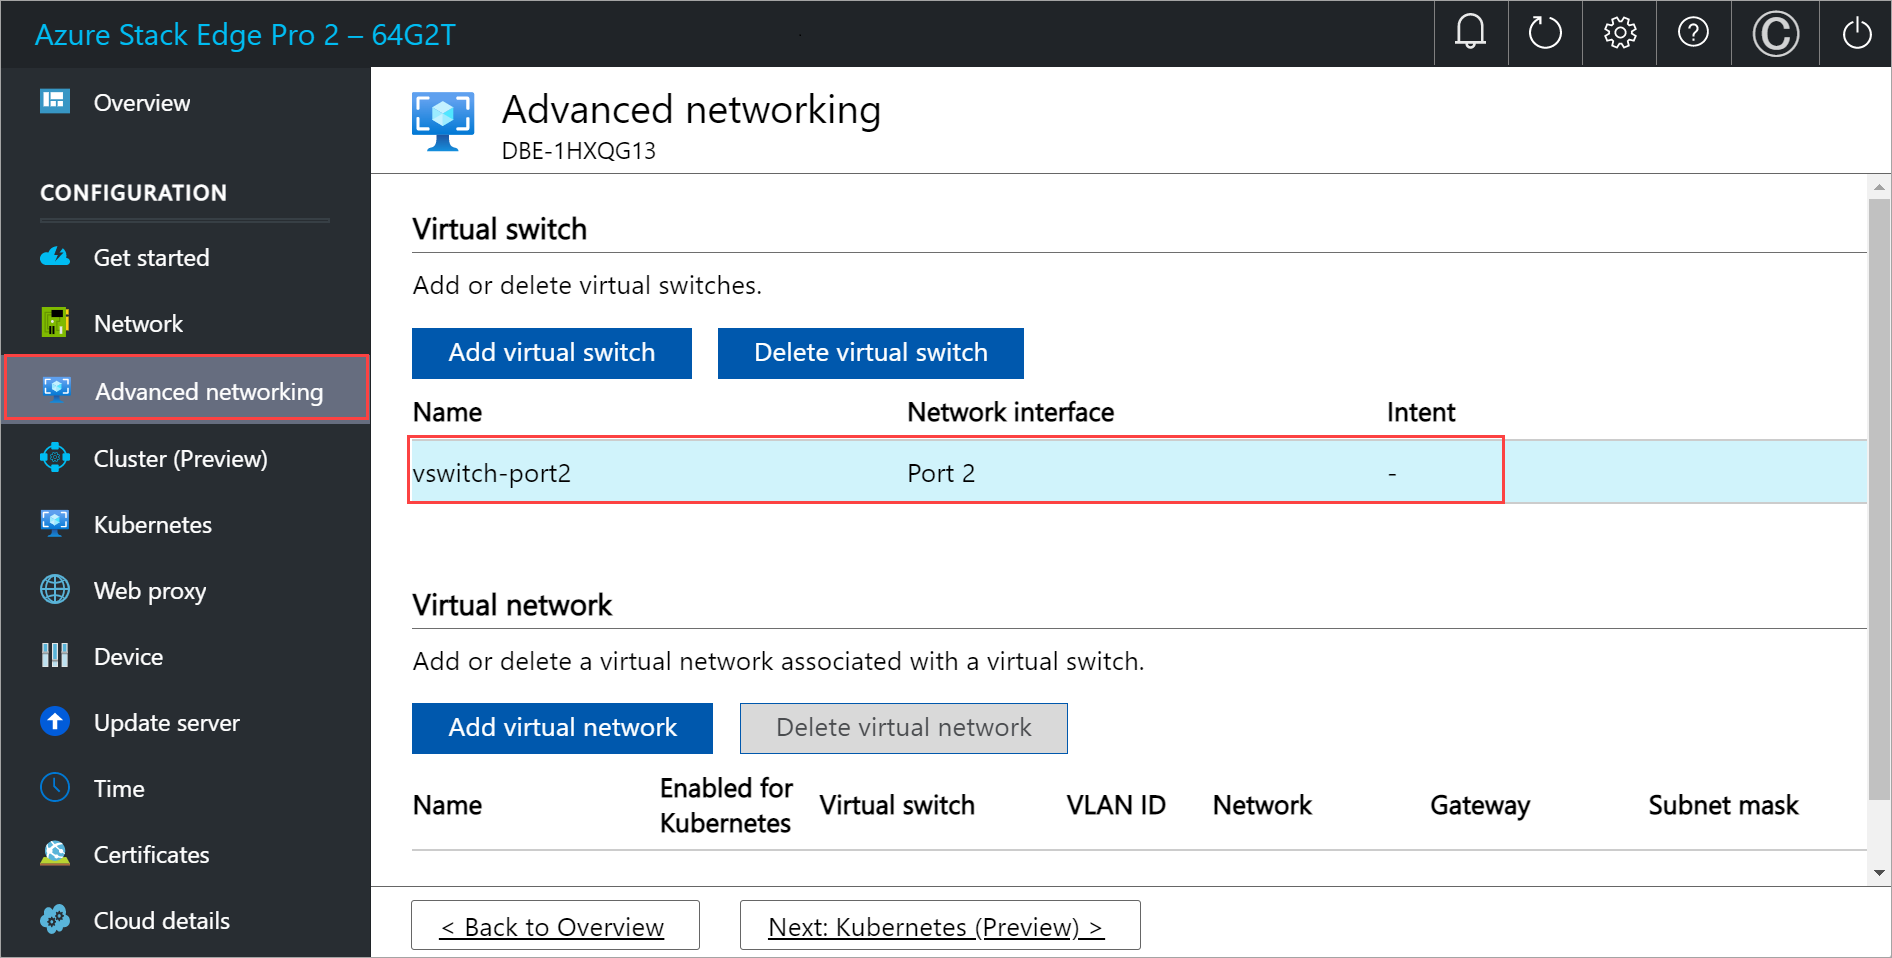 Screenshot of the Configure compute page in Advanced networking in local UI 3.